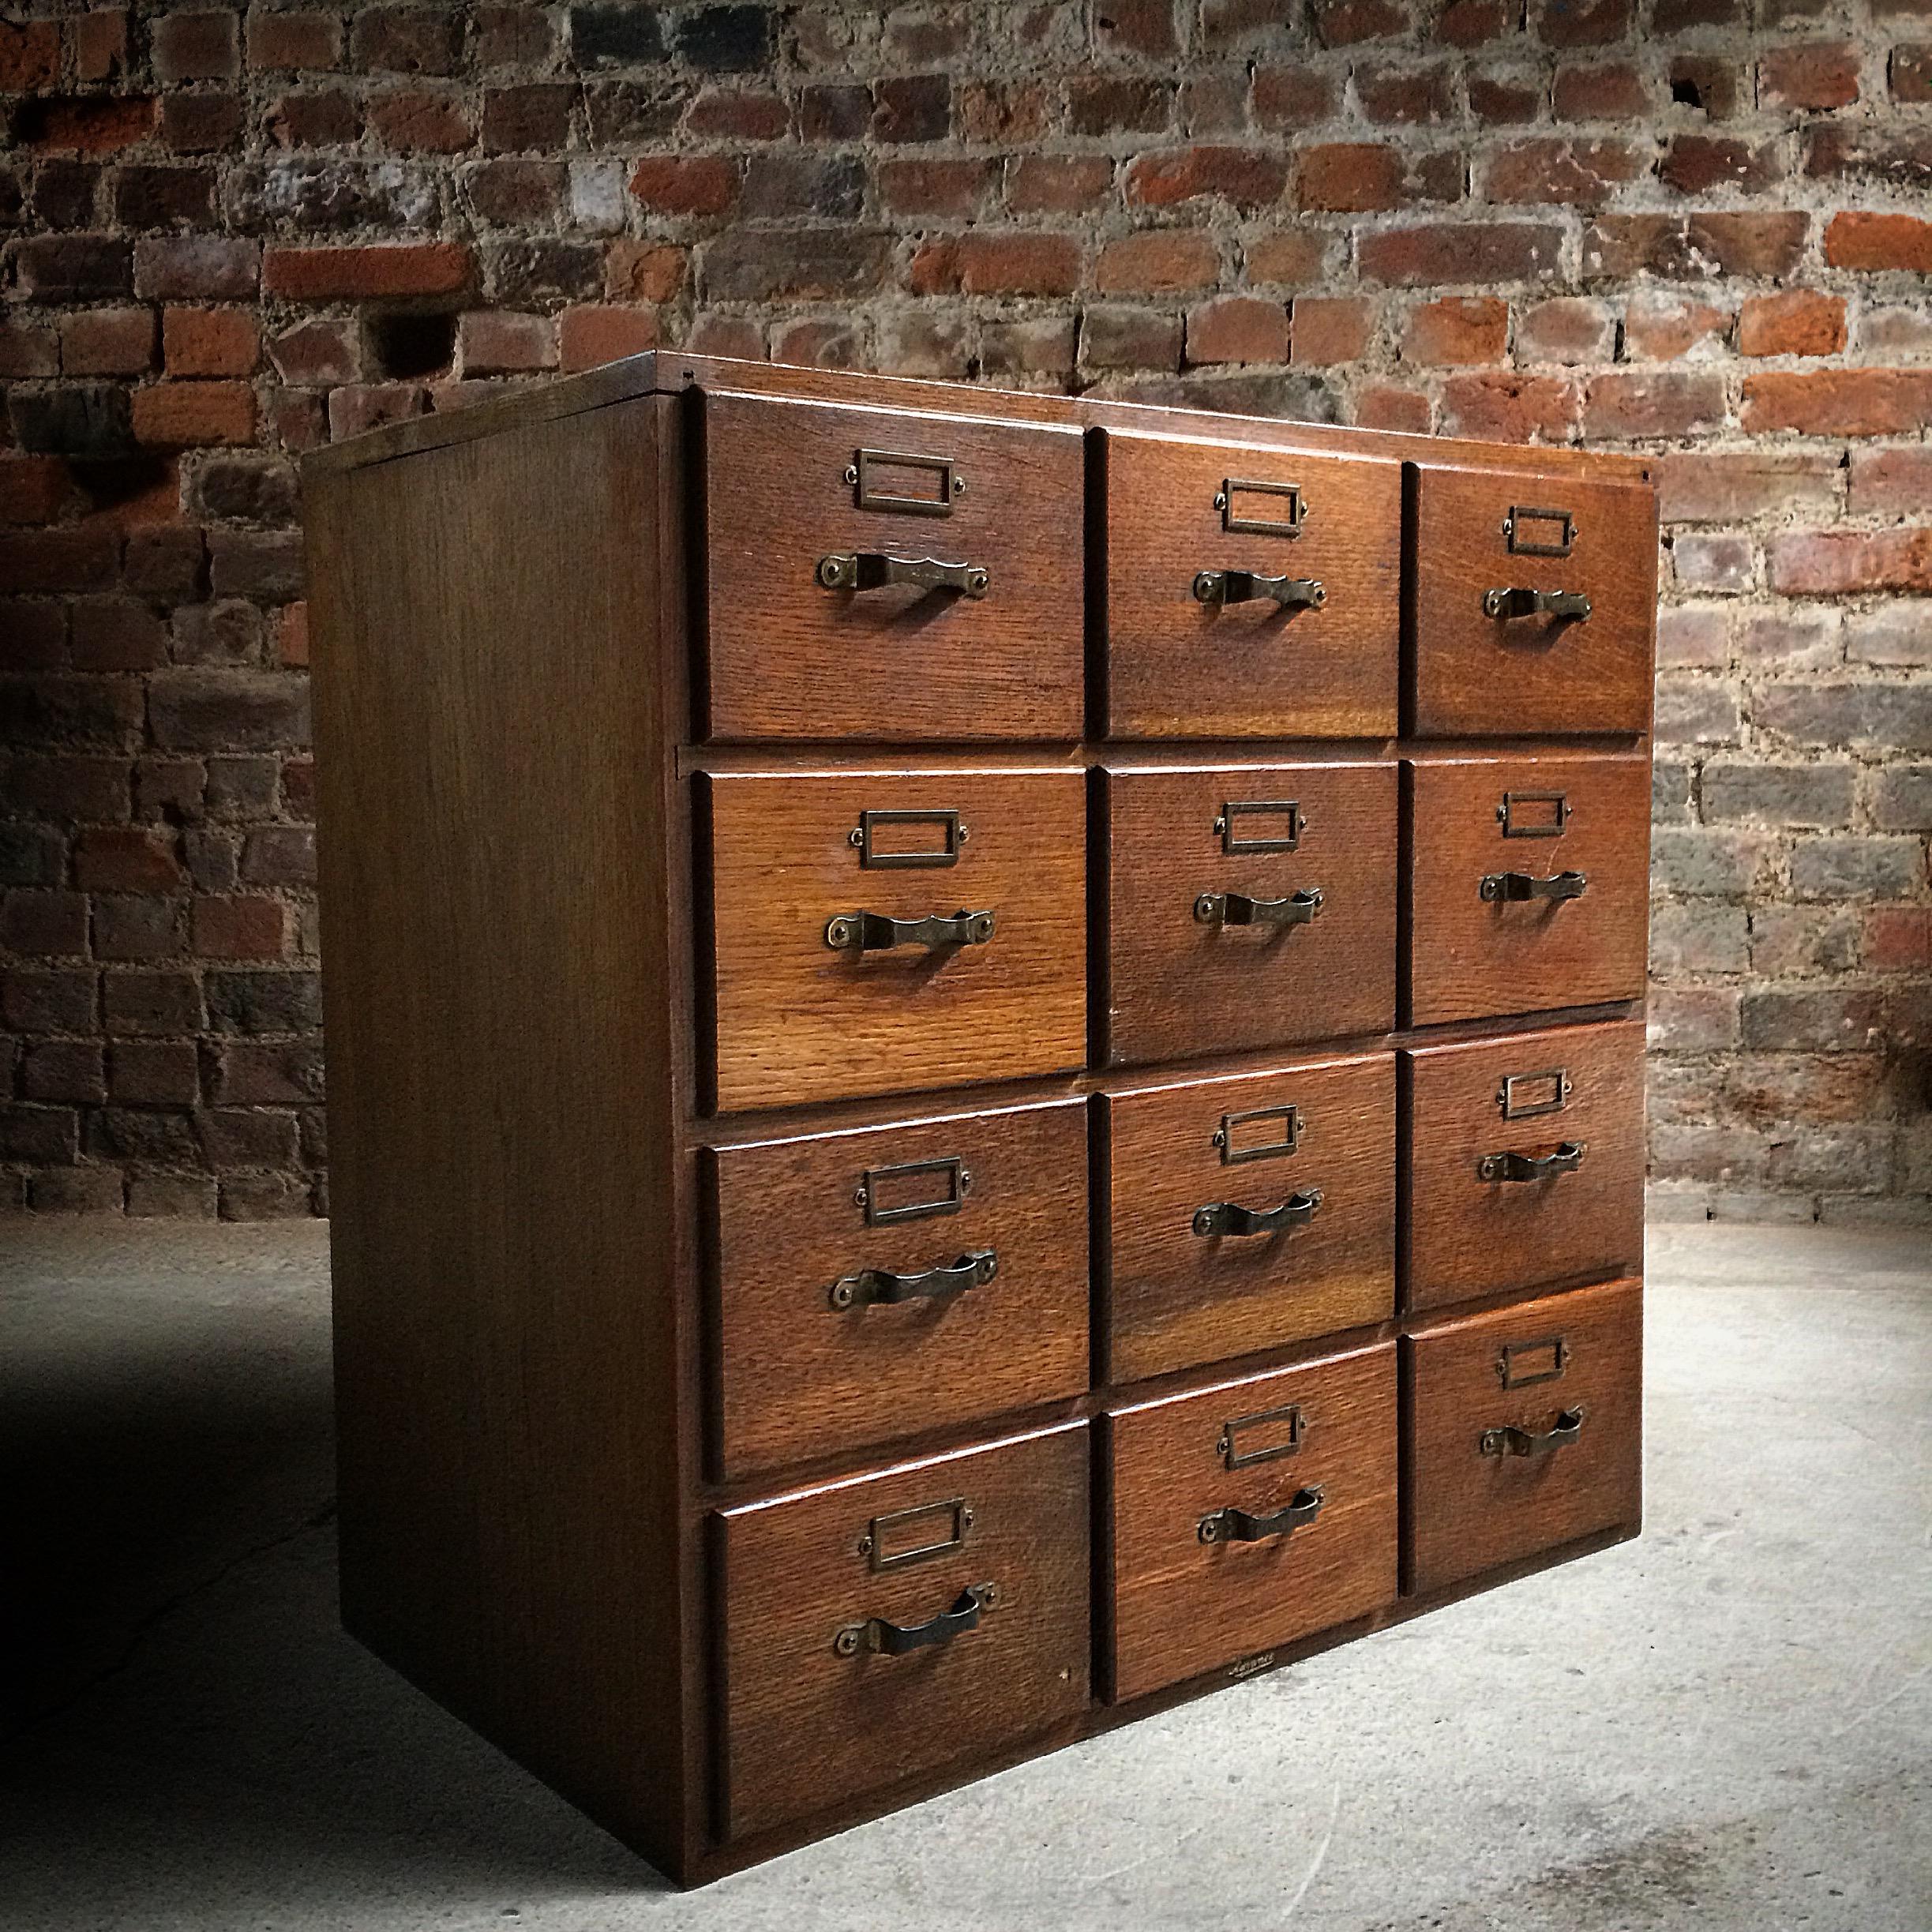 Advance systems oak filing cabinet circa 1900s, the rectangular top over twelve numbered drawers all with brass pull handles and index card holders, solid oak, she’s a beauty.

PS: If one wanted to make this even nicer, you could easily attach